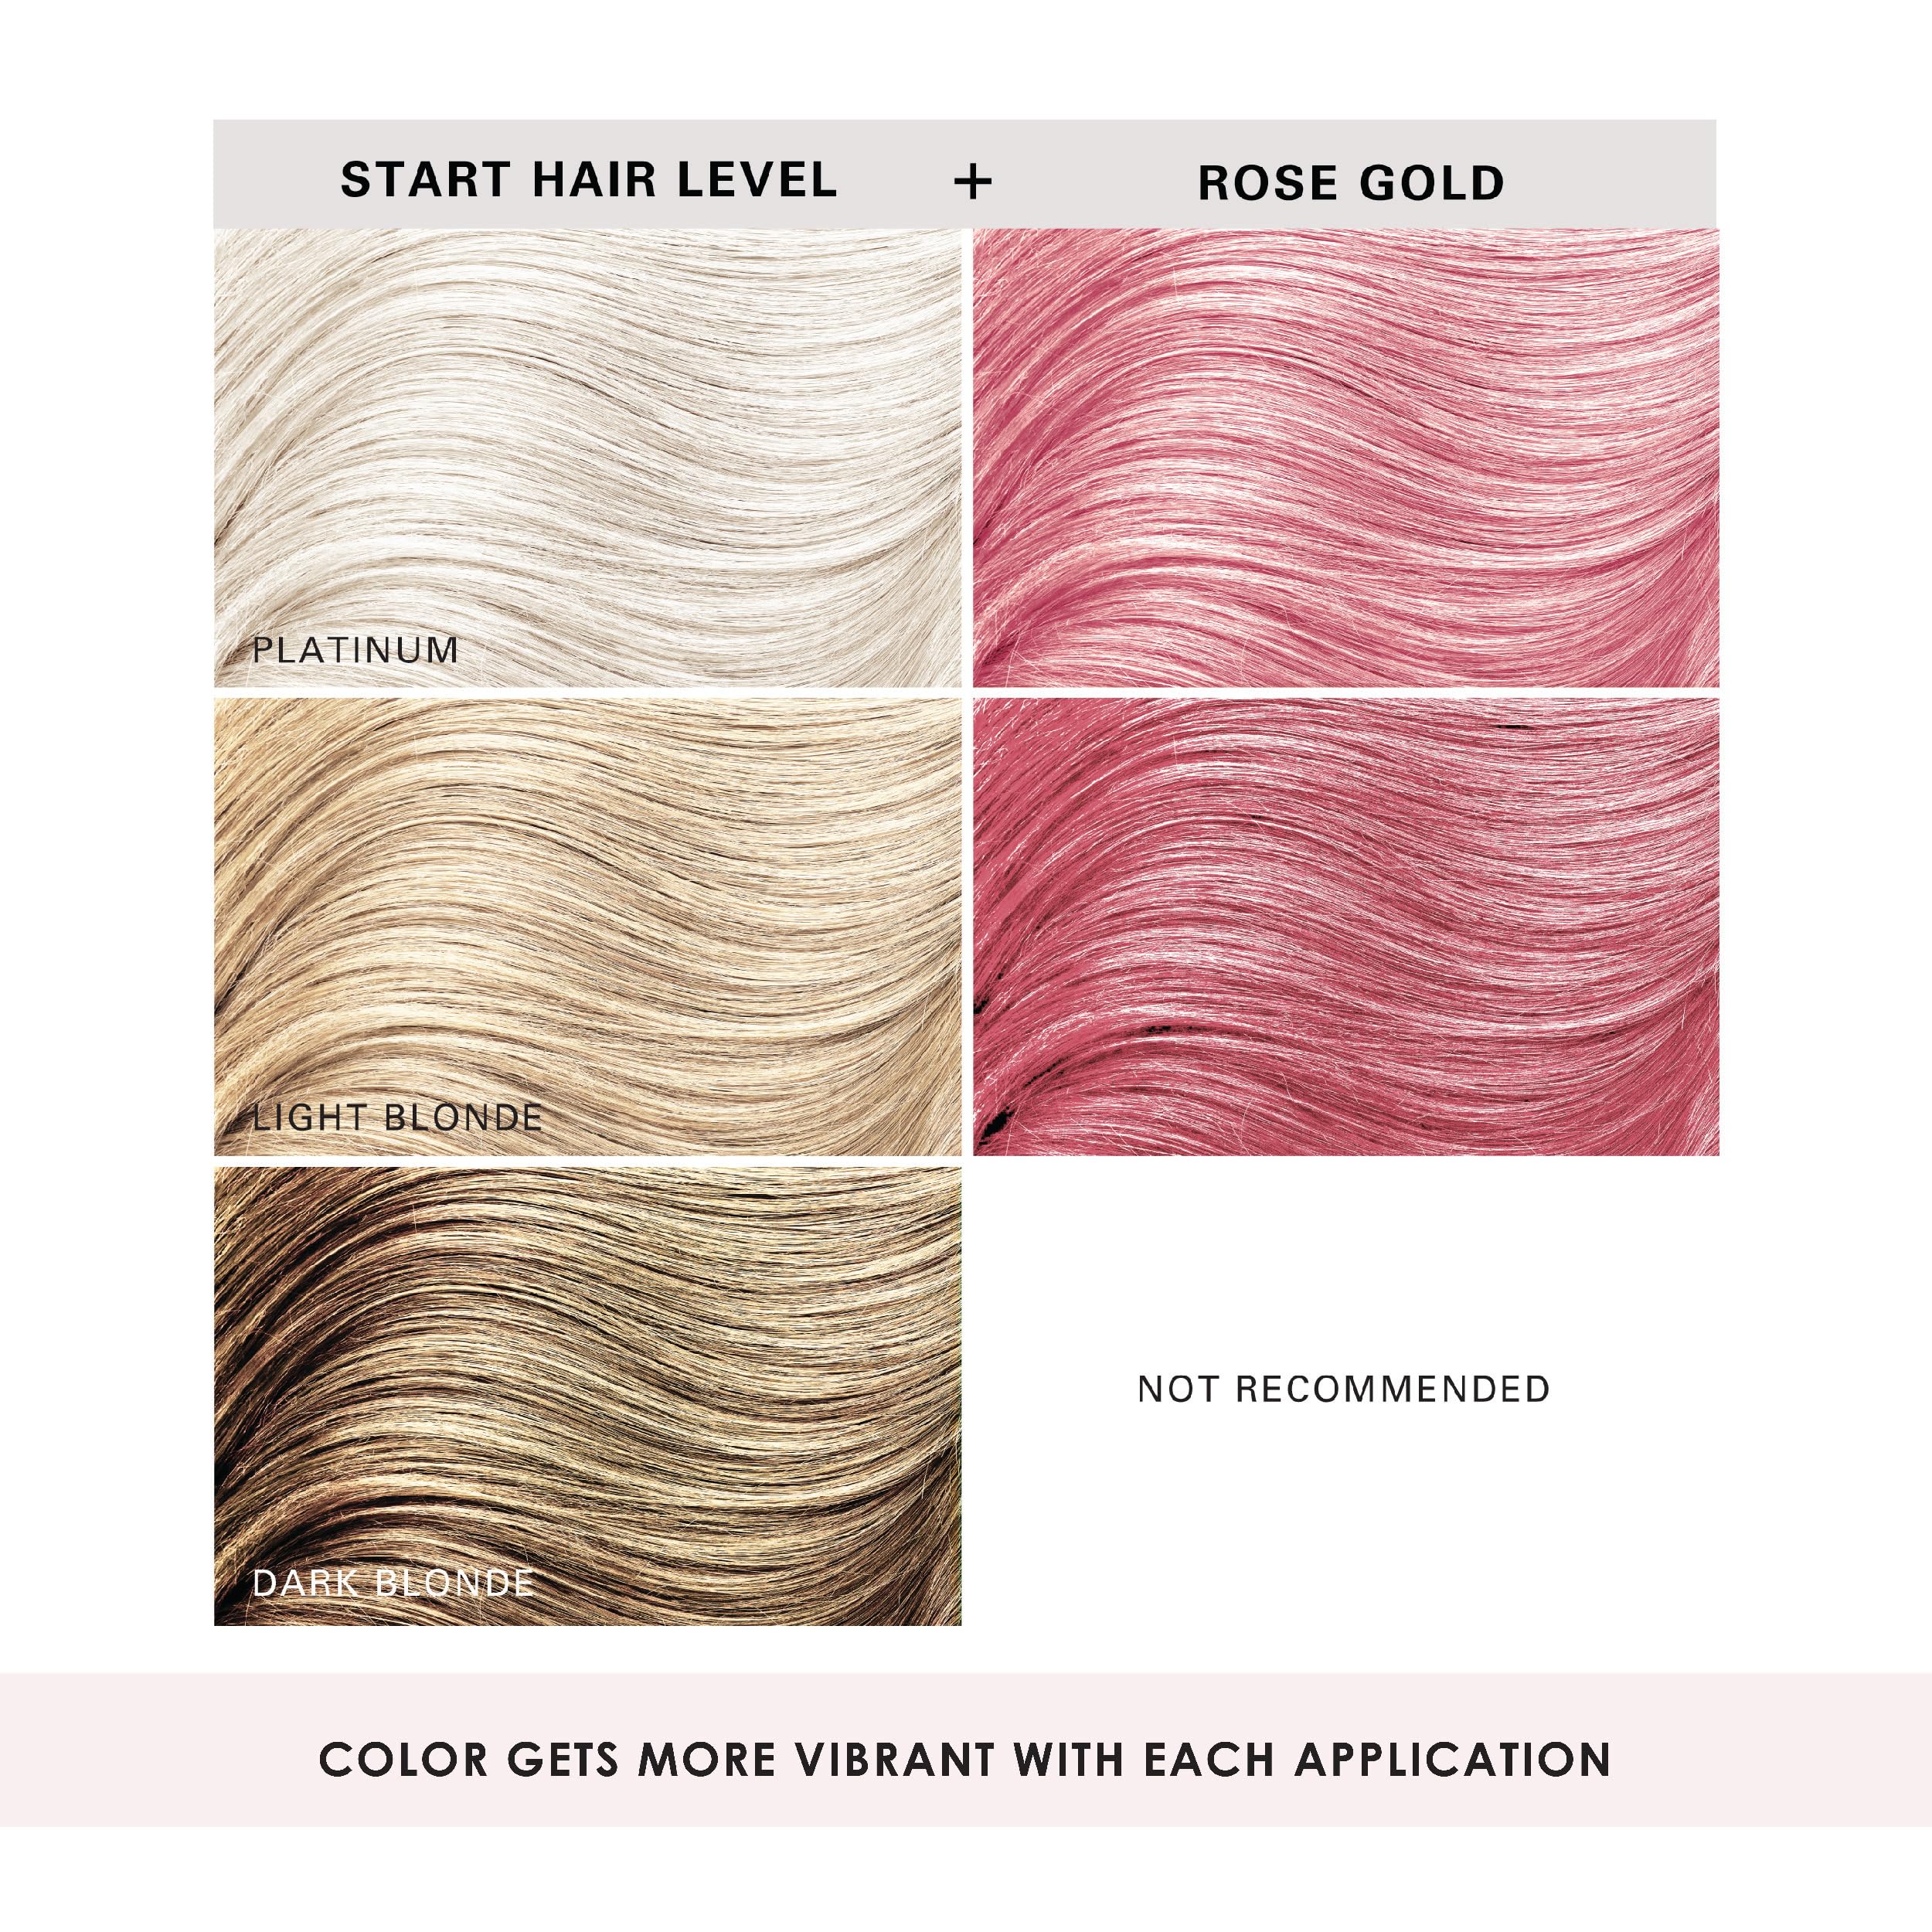 Keracolor Clenditioner Hair Dye - Semi Permanent Hair Color Depositing Conditioner, Cruelty-free, 20 Colors